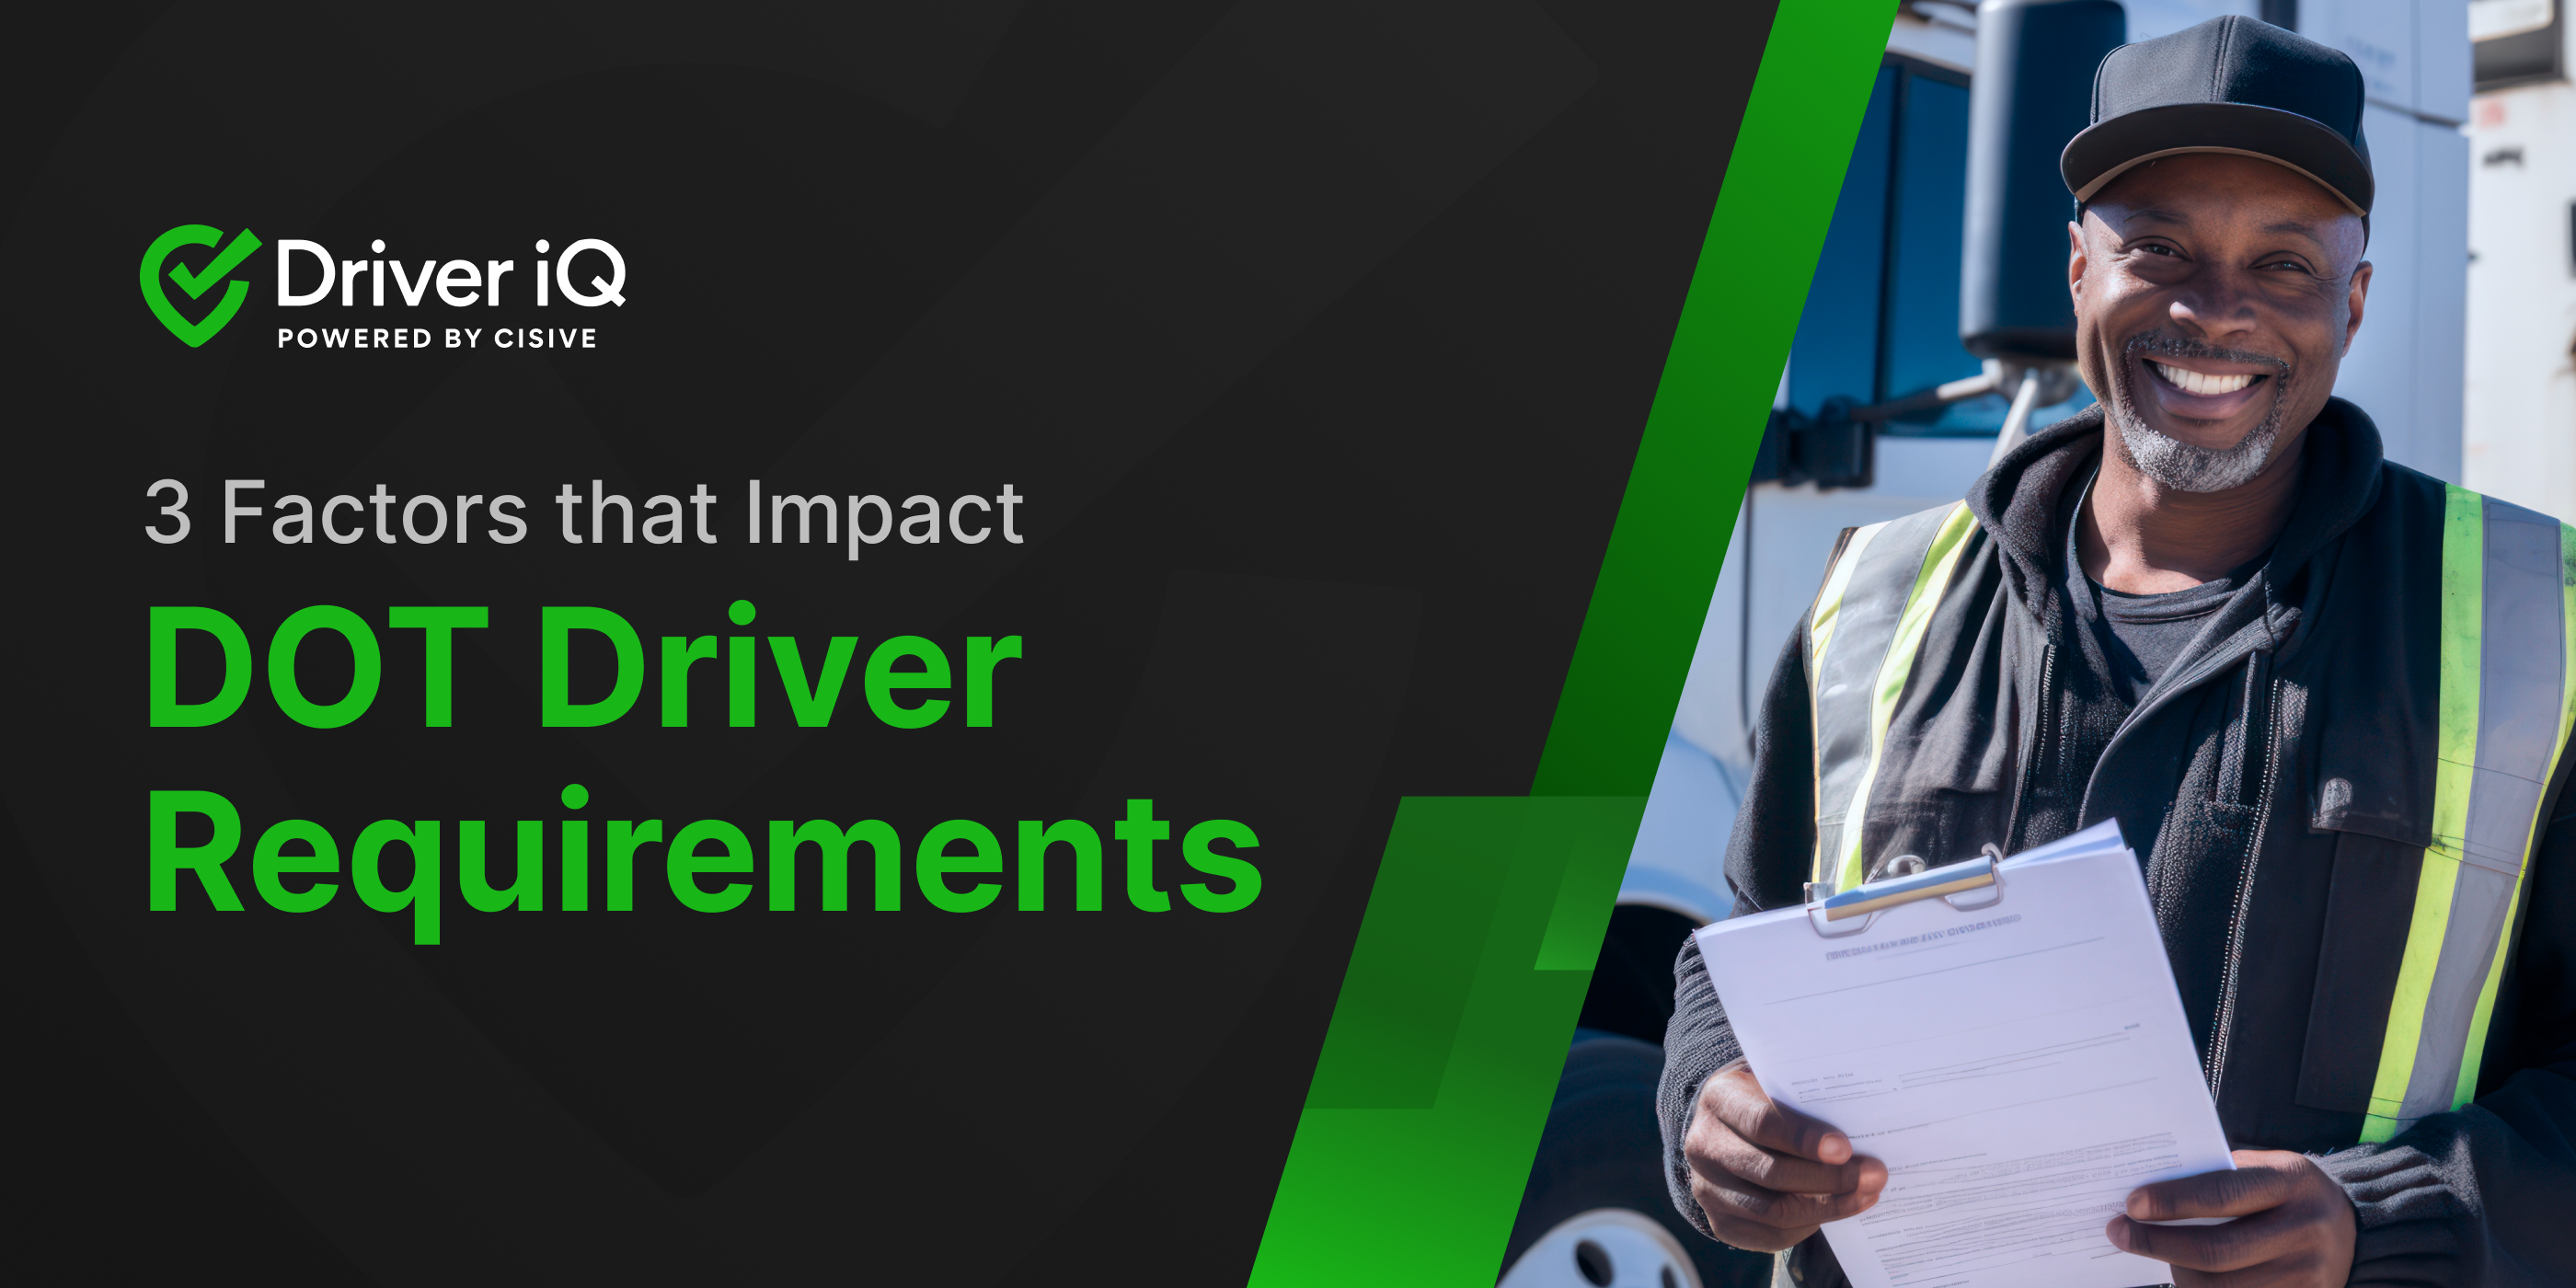 Driver iQ, Powered by Cisive. 3 Factors that Impact DOT Driver Requirements.